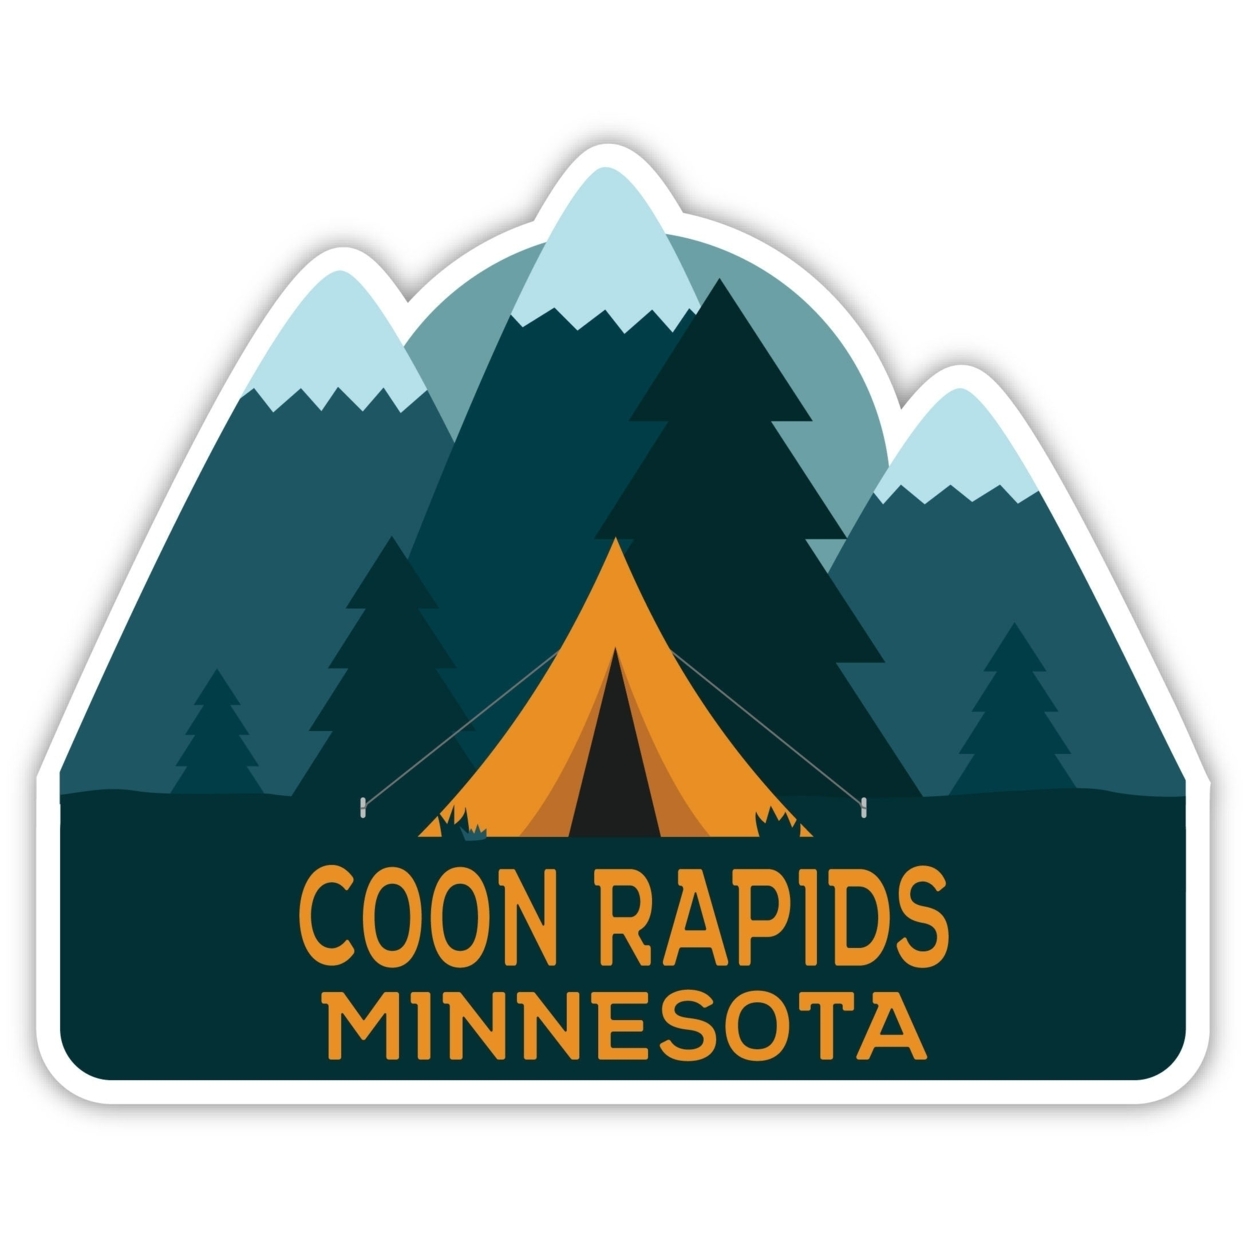 Coon Rapids Minnesota Souvenir Decorative Stickers (Choose Theme And Size) - 4-Pack, 10-Inch, Bear